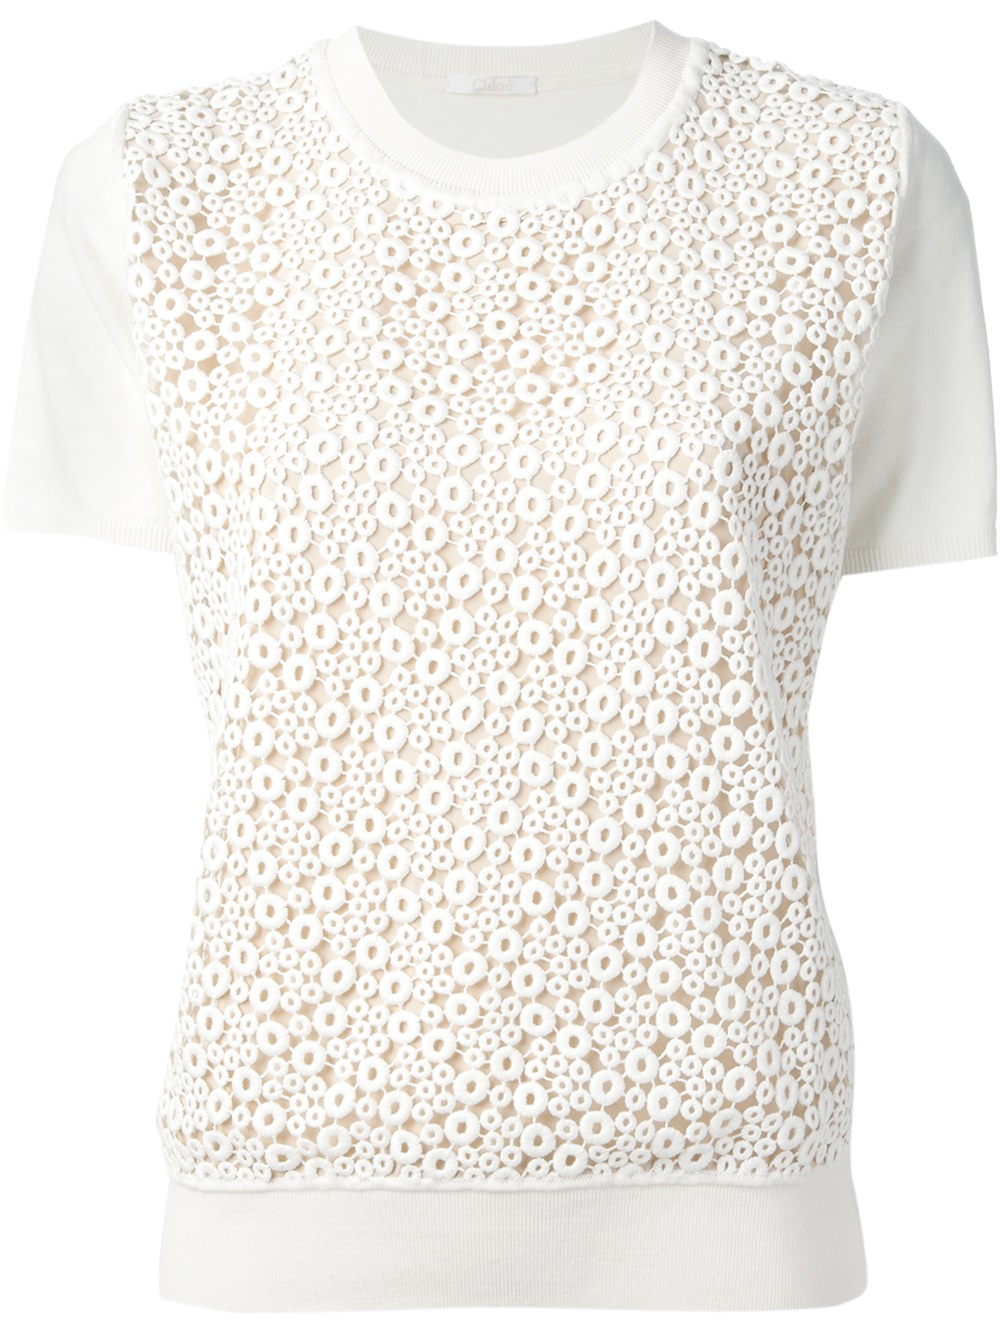 Chloé Lace Panel Sweater in White | Lyst